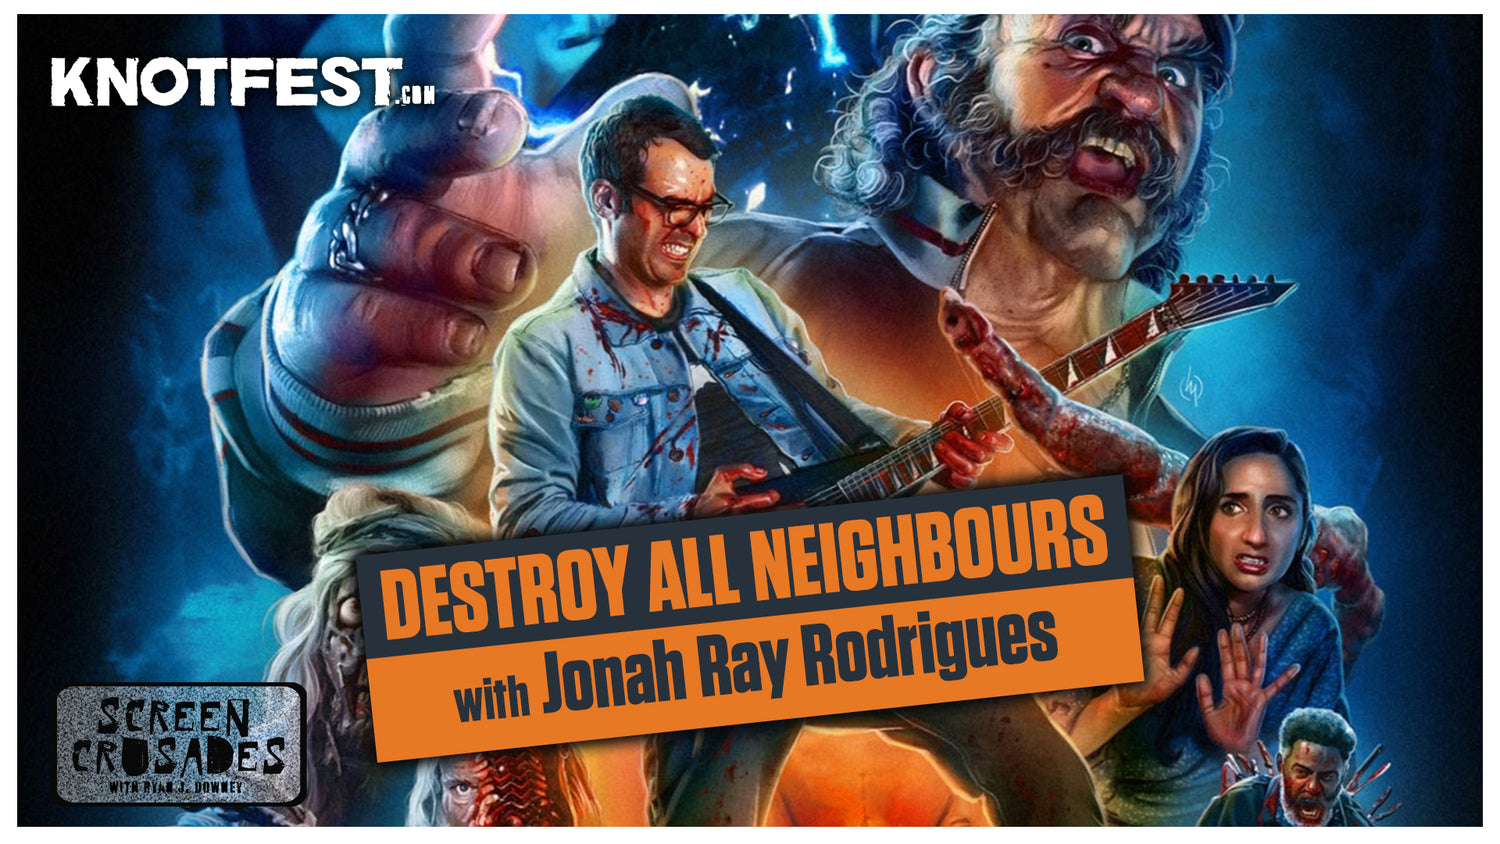 Screen Crusades: JONAH RAY RODRIGUES discusses DESTROY ALL NEIGHBOURS